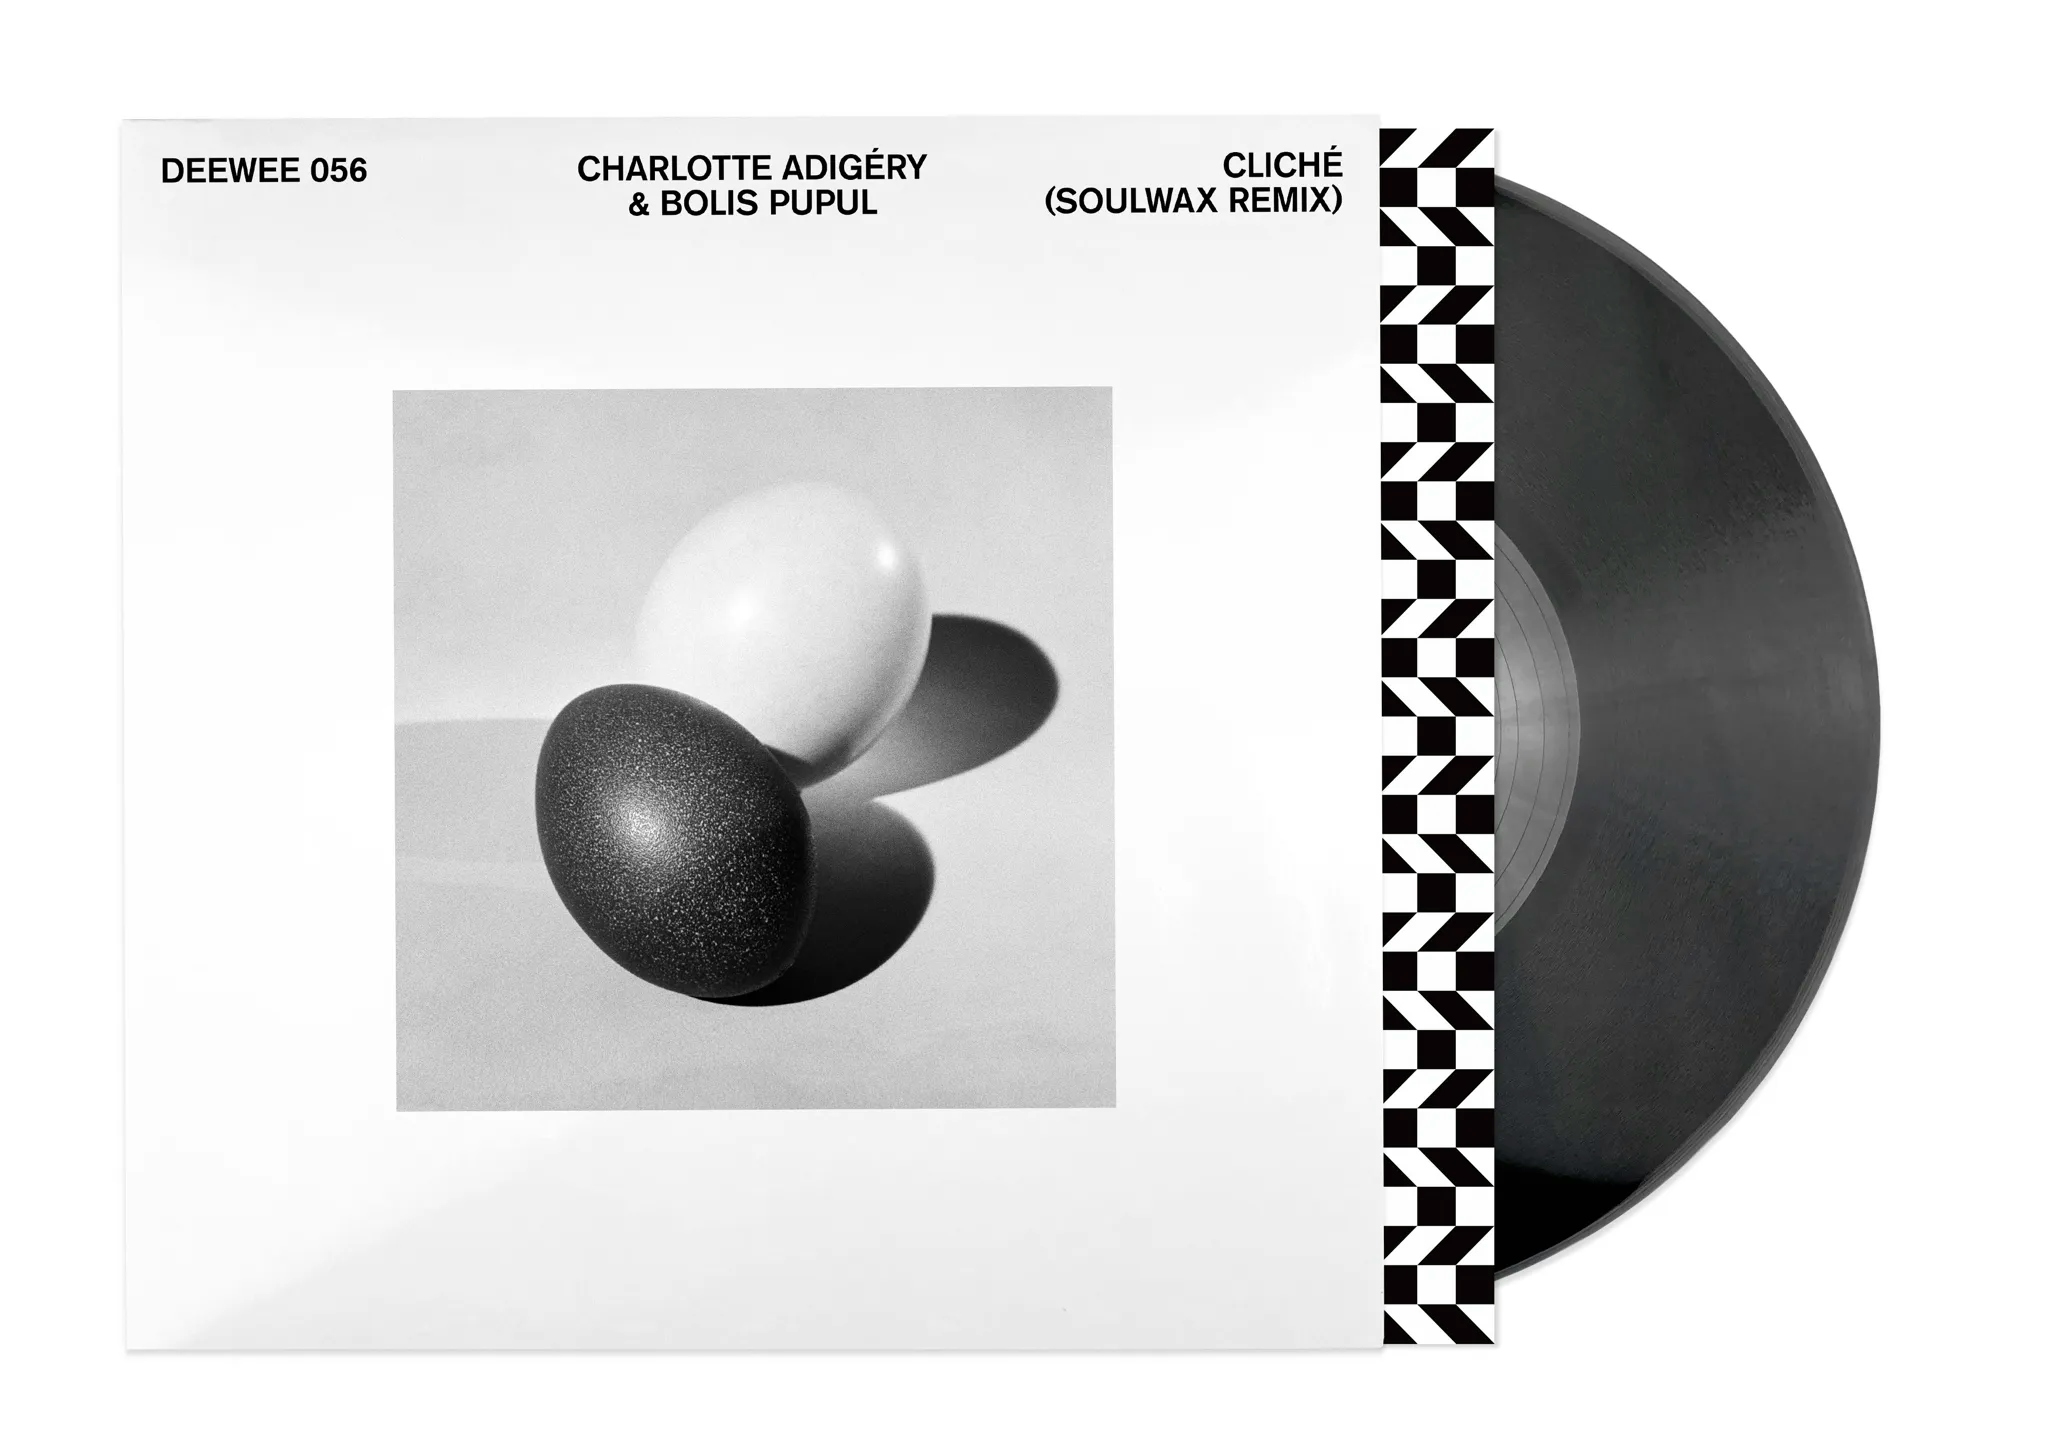 Album artwork for Cliche (Soulwax Remix) by Charlotte Adigery and Bolis Pupul 